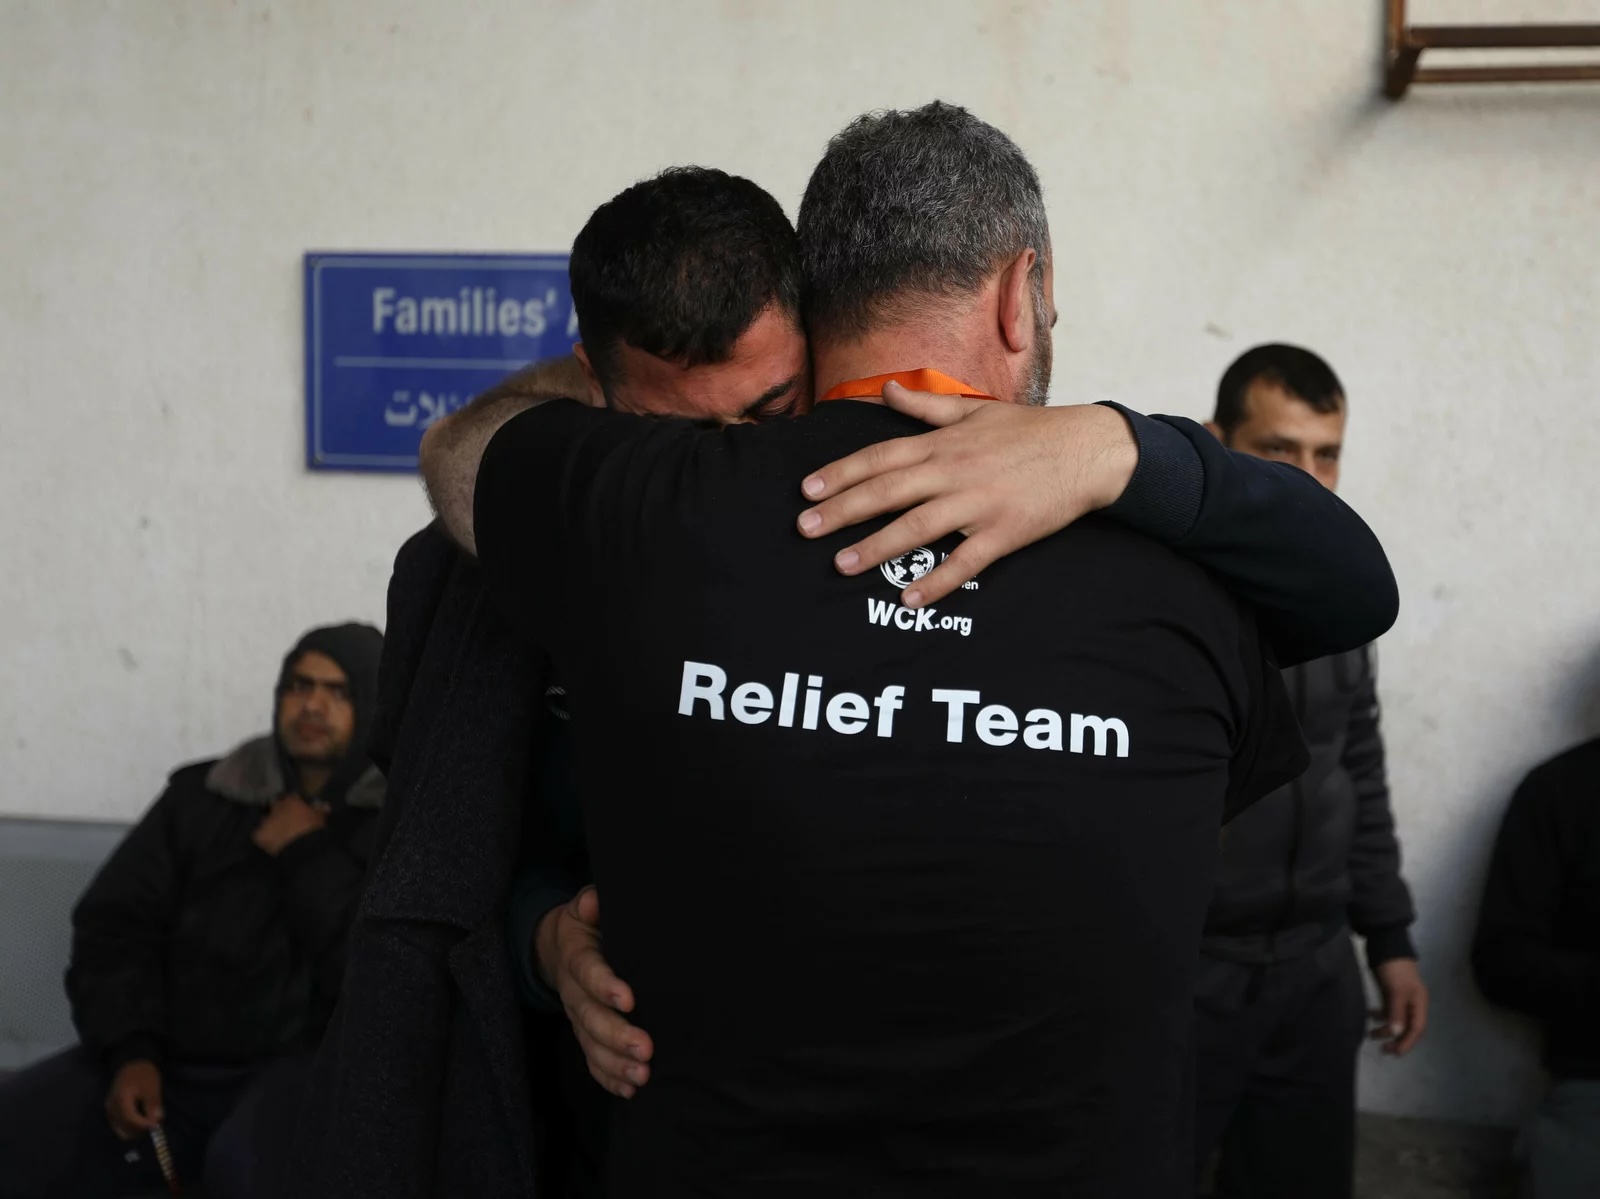 Two men are hugging, one man's shirt reads "Relief Team."